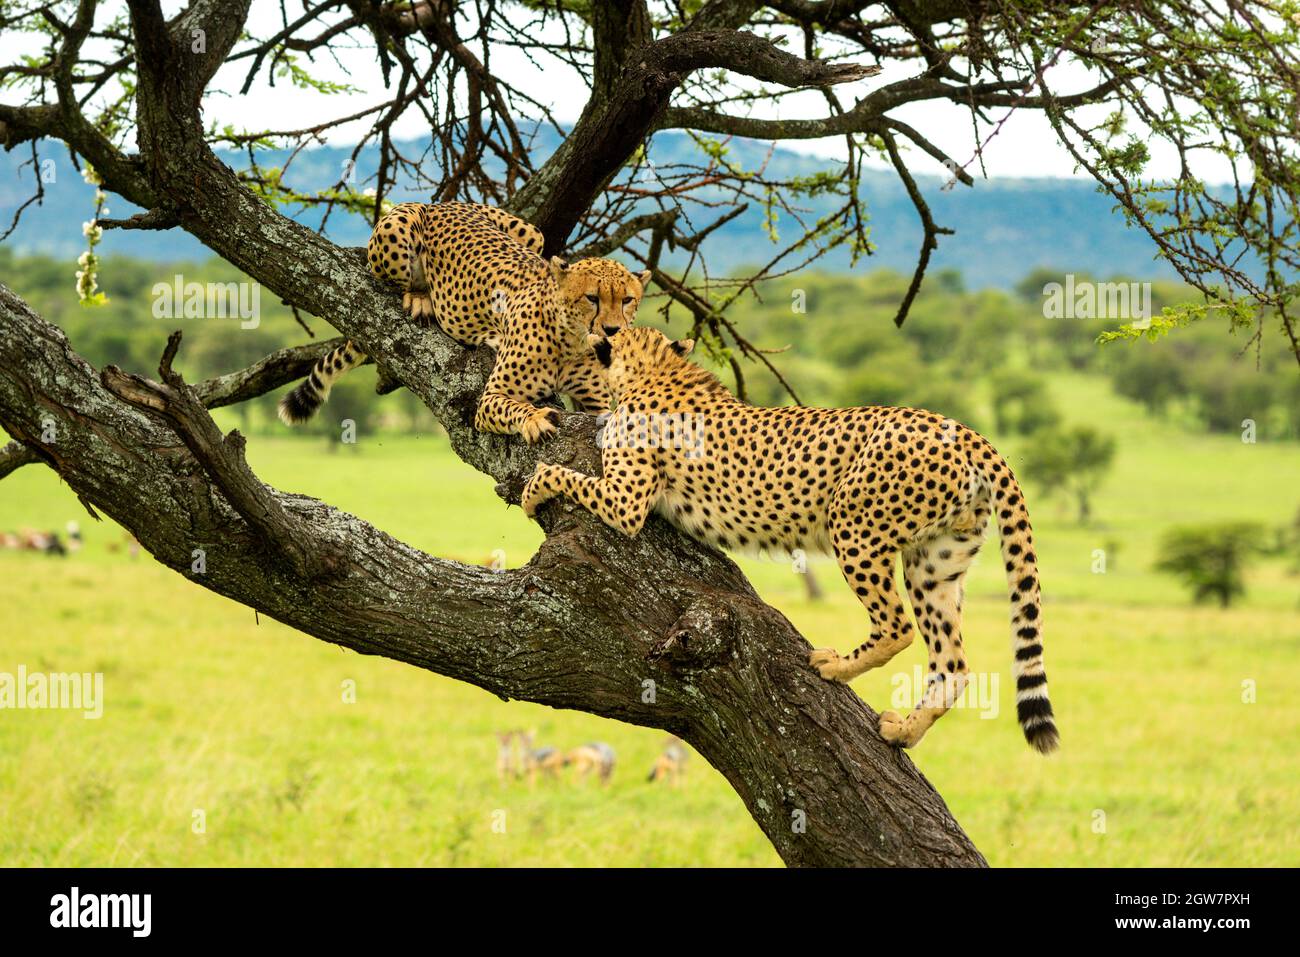 Cheetahs Climbs To Another Lying On Branch Stock Photo